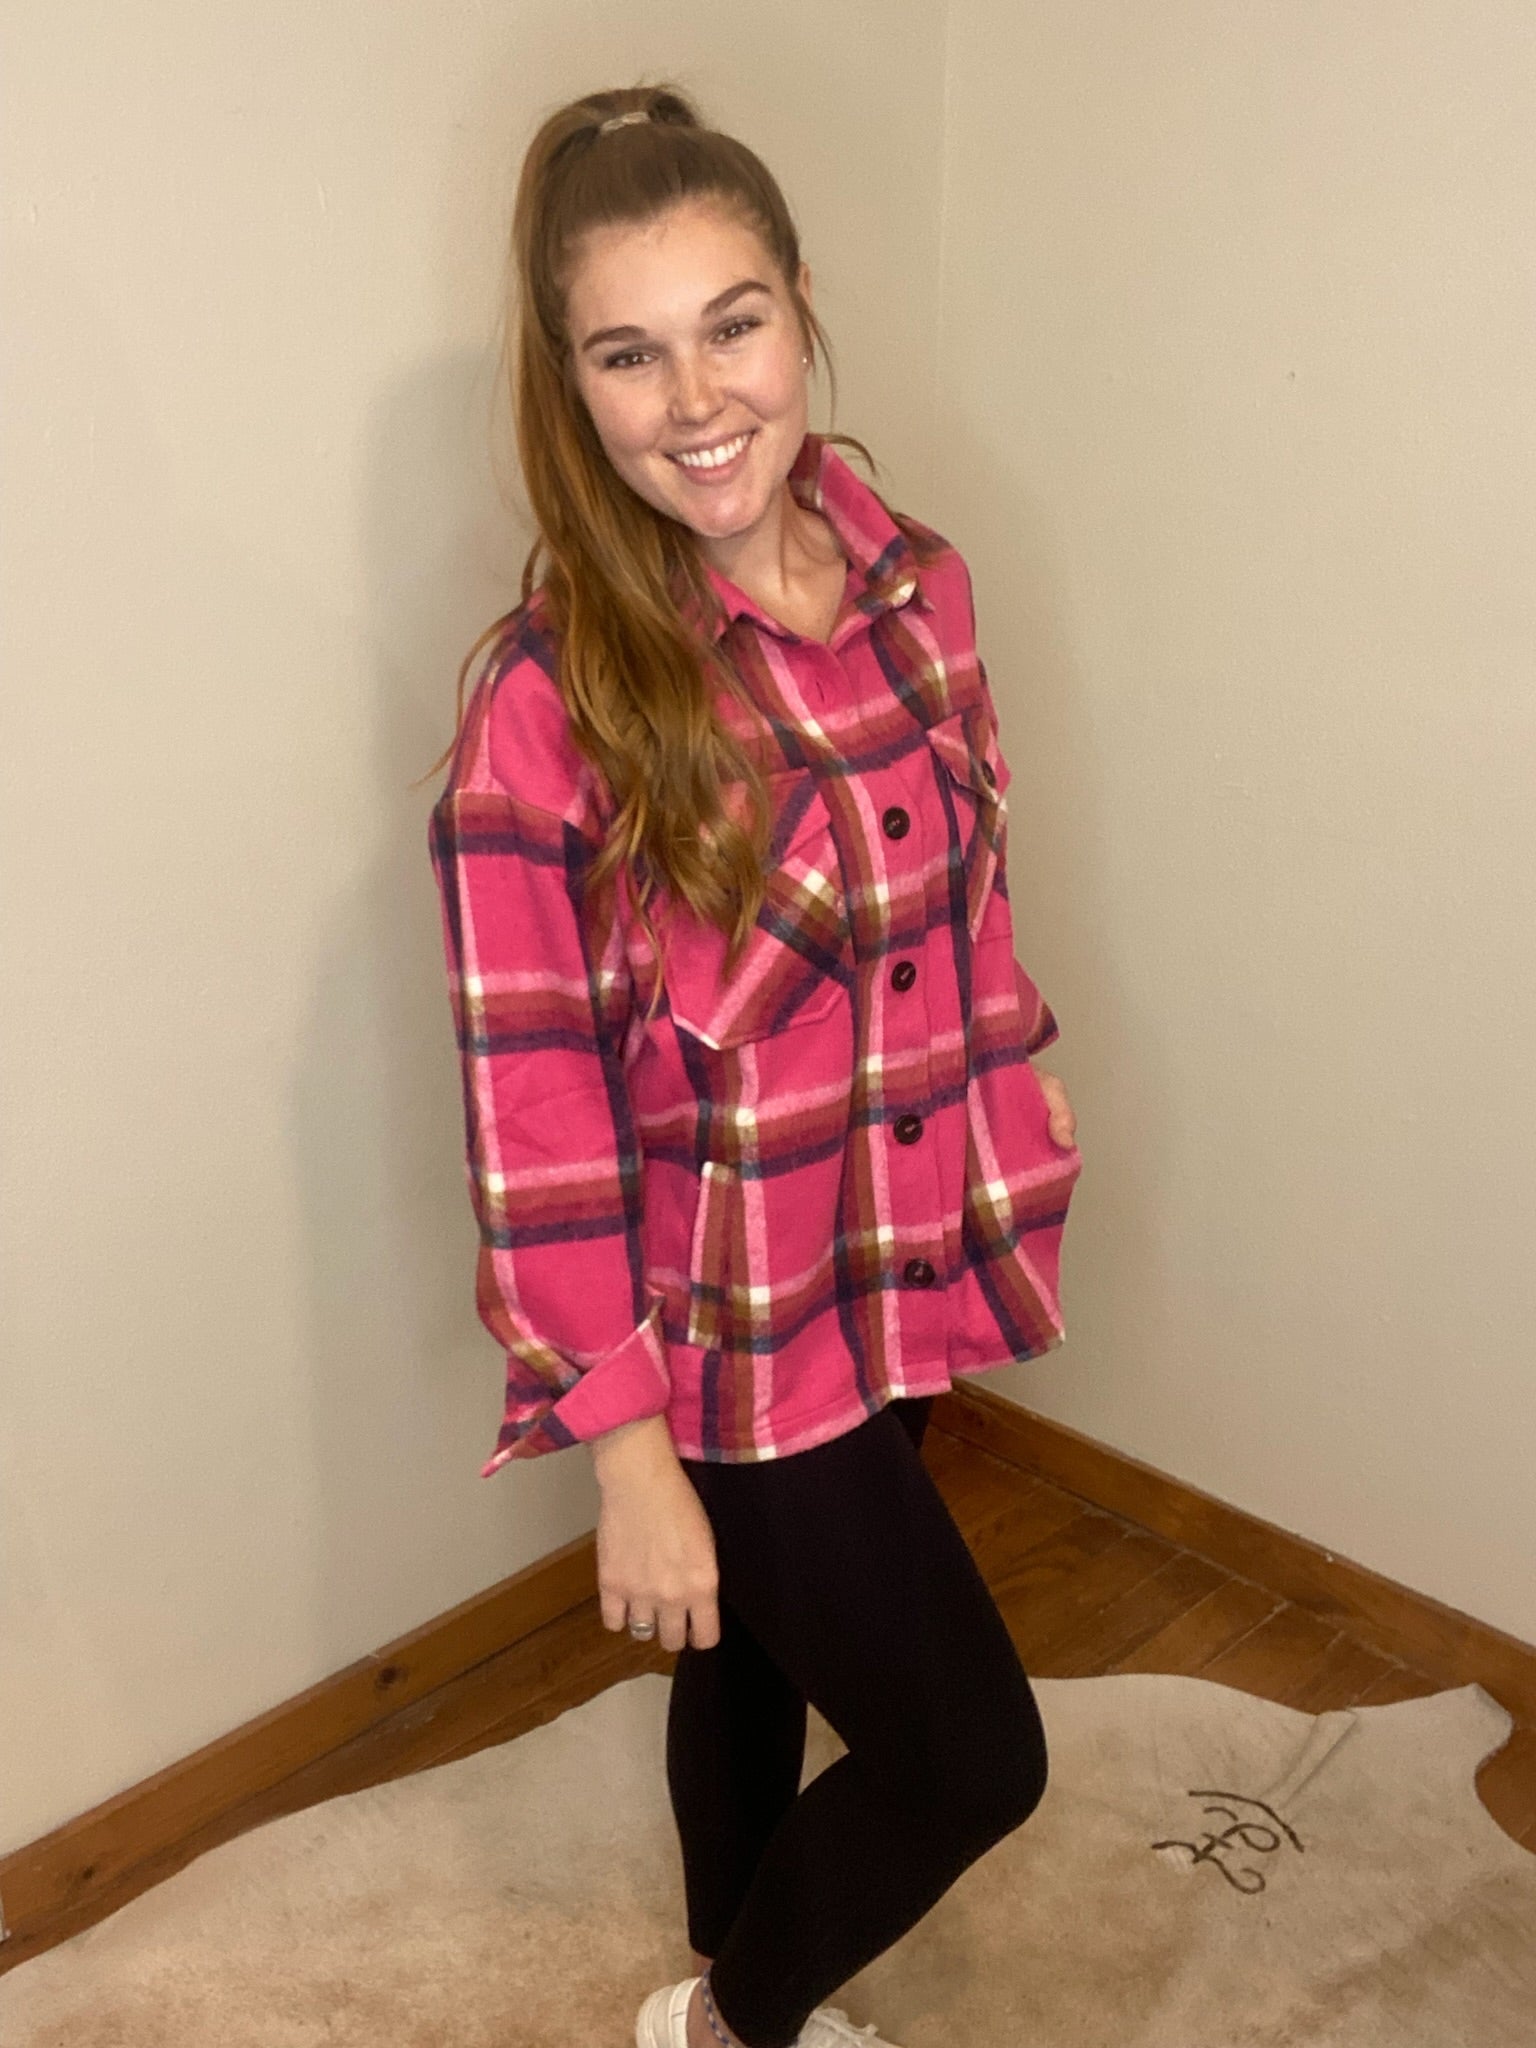 The YARN DYED PLAID SHACKET WITH POCKETS